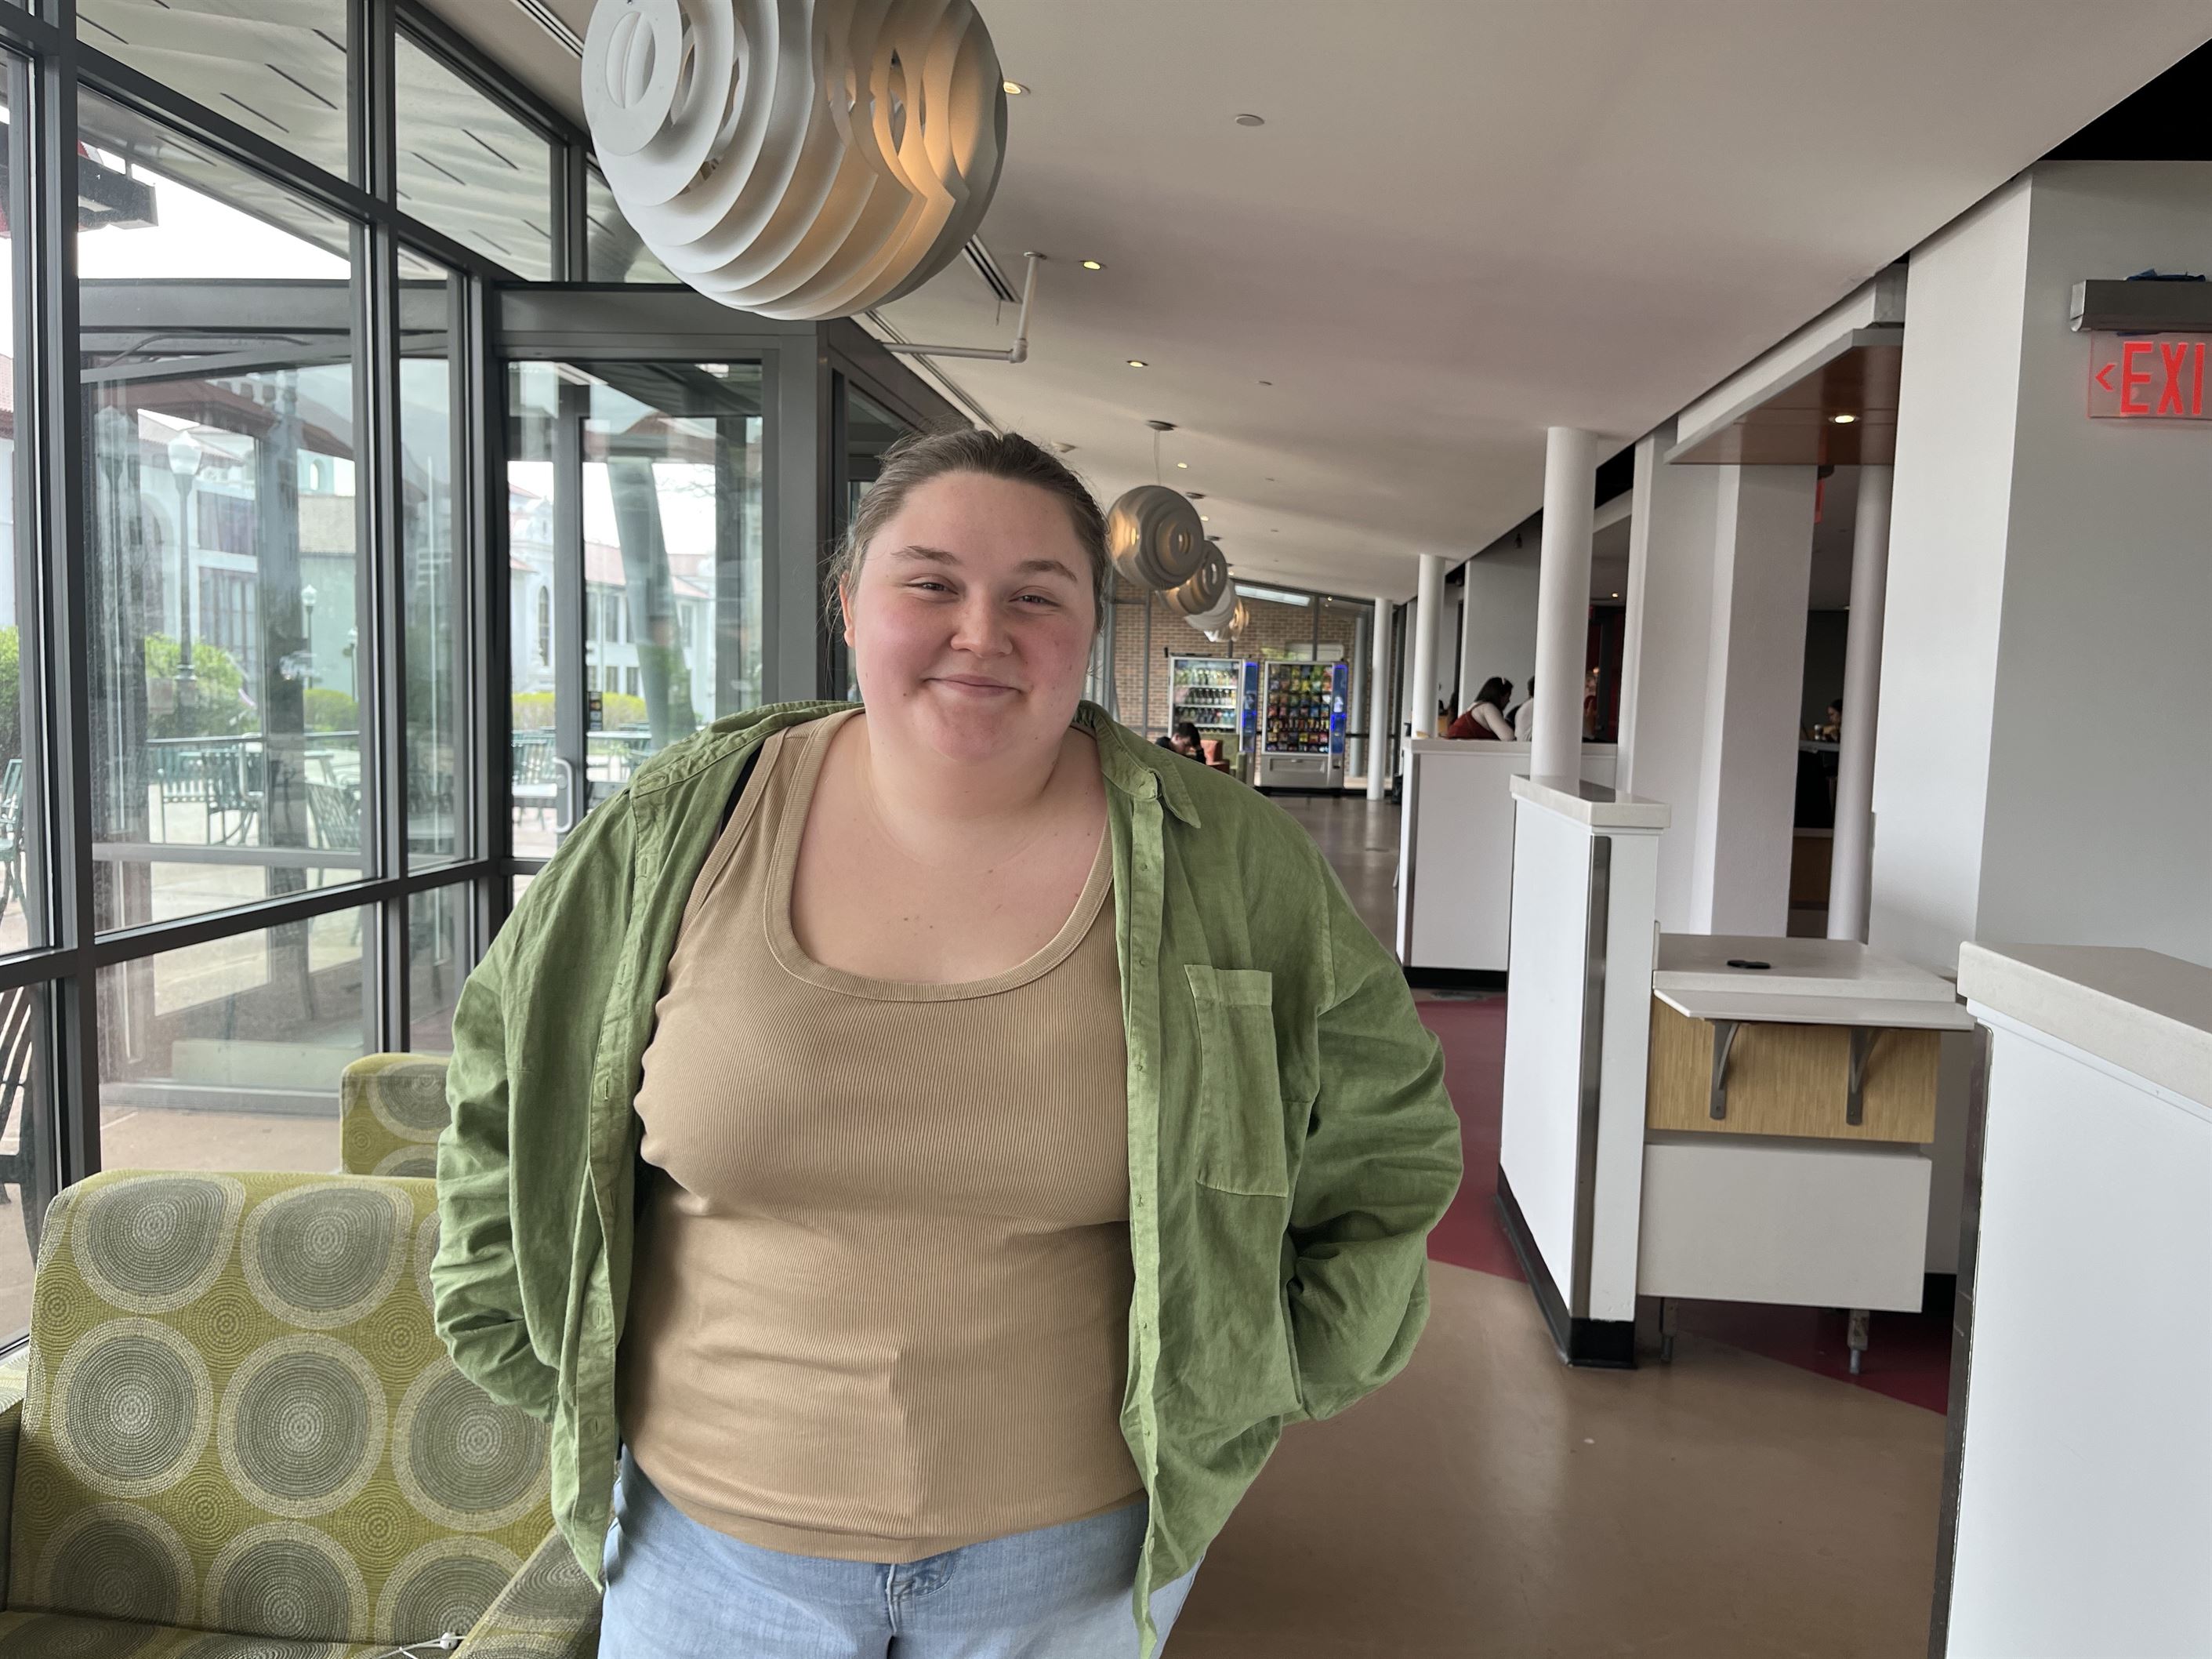 Addison Berzolla, a freshman English major, says recognizing this month can make campus a safer place.
Jenna Sundel | The Montclarion